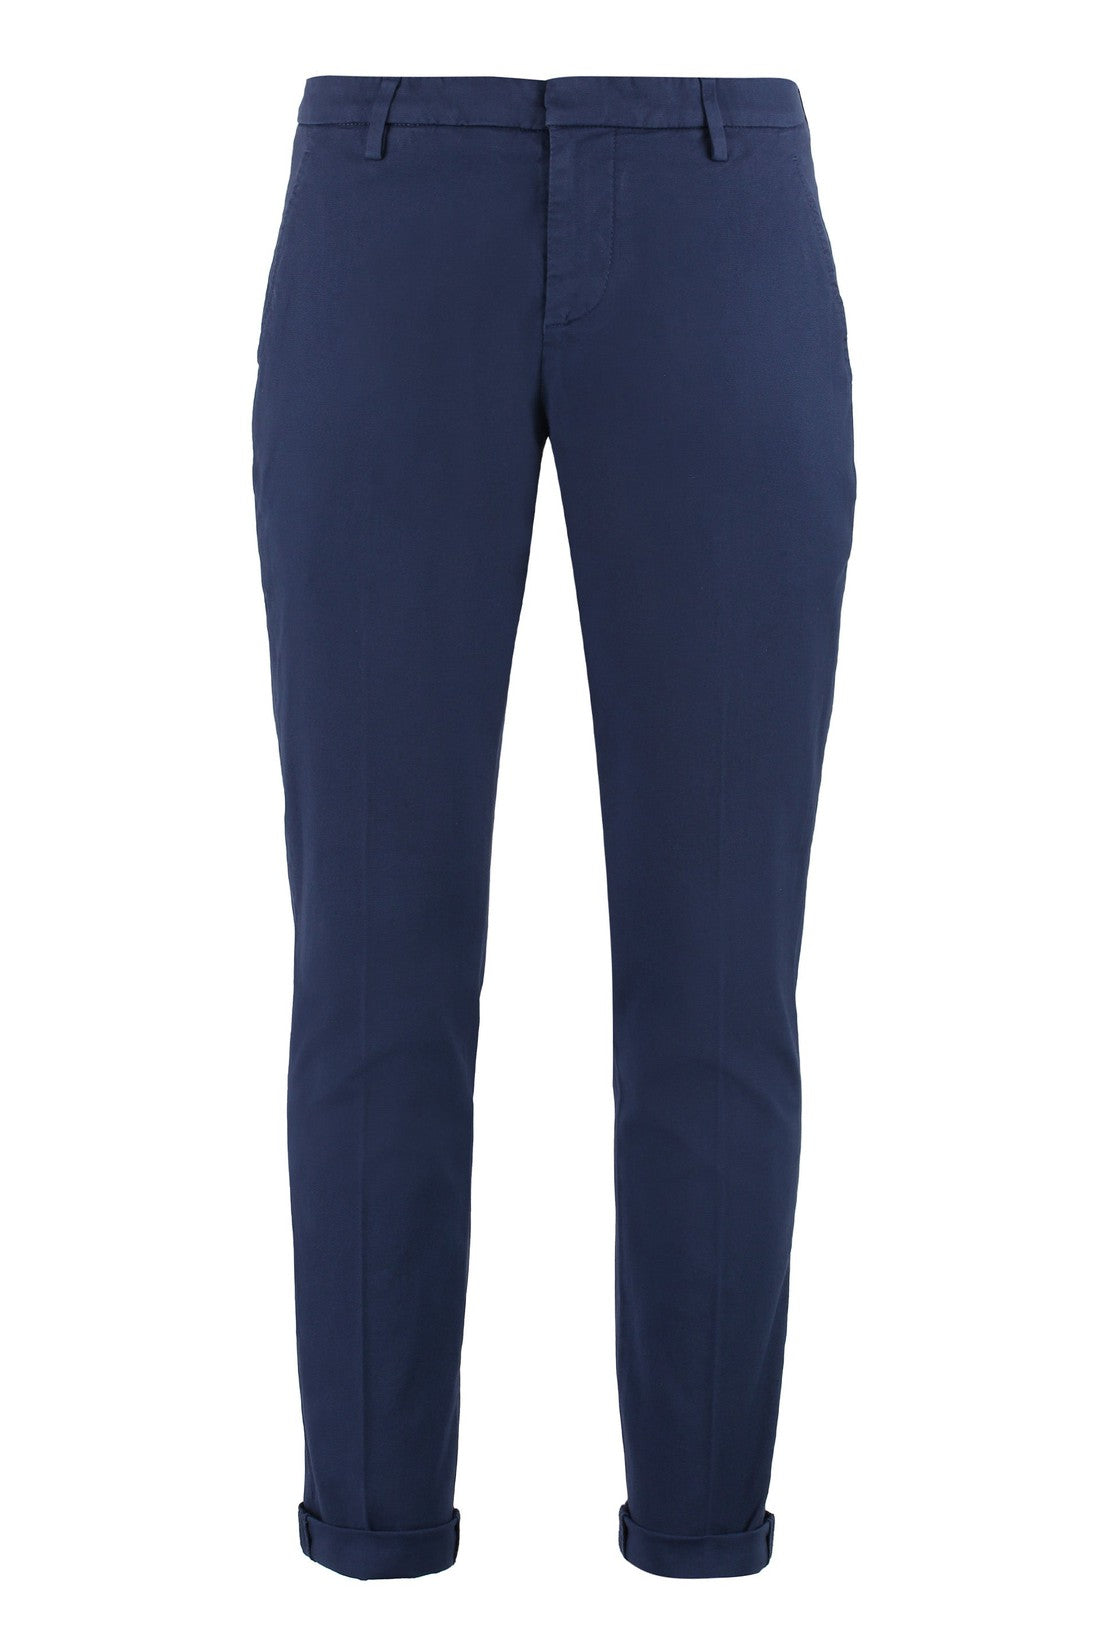 Dondup-OUTLET-SALE-Gaubert stretch cotton chino trousers-ARCHIVIST